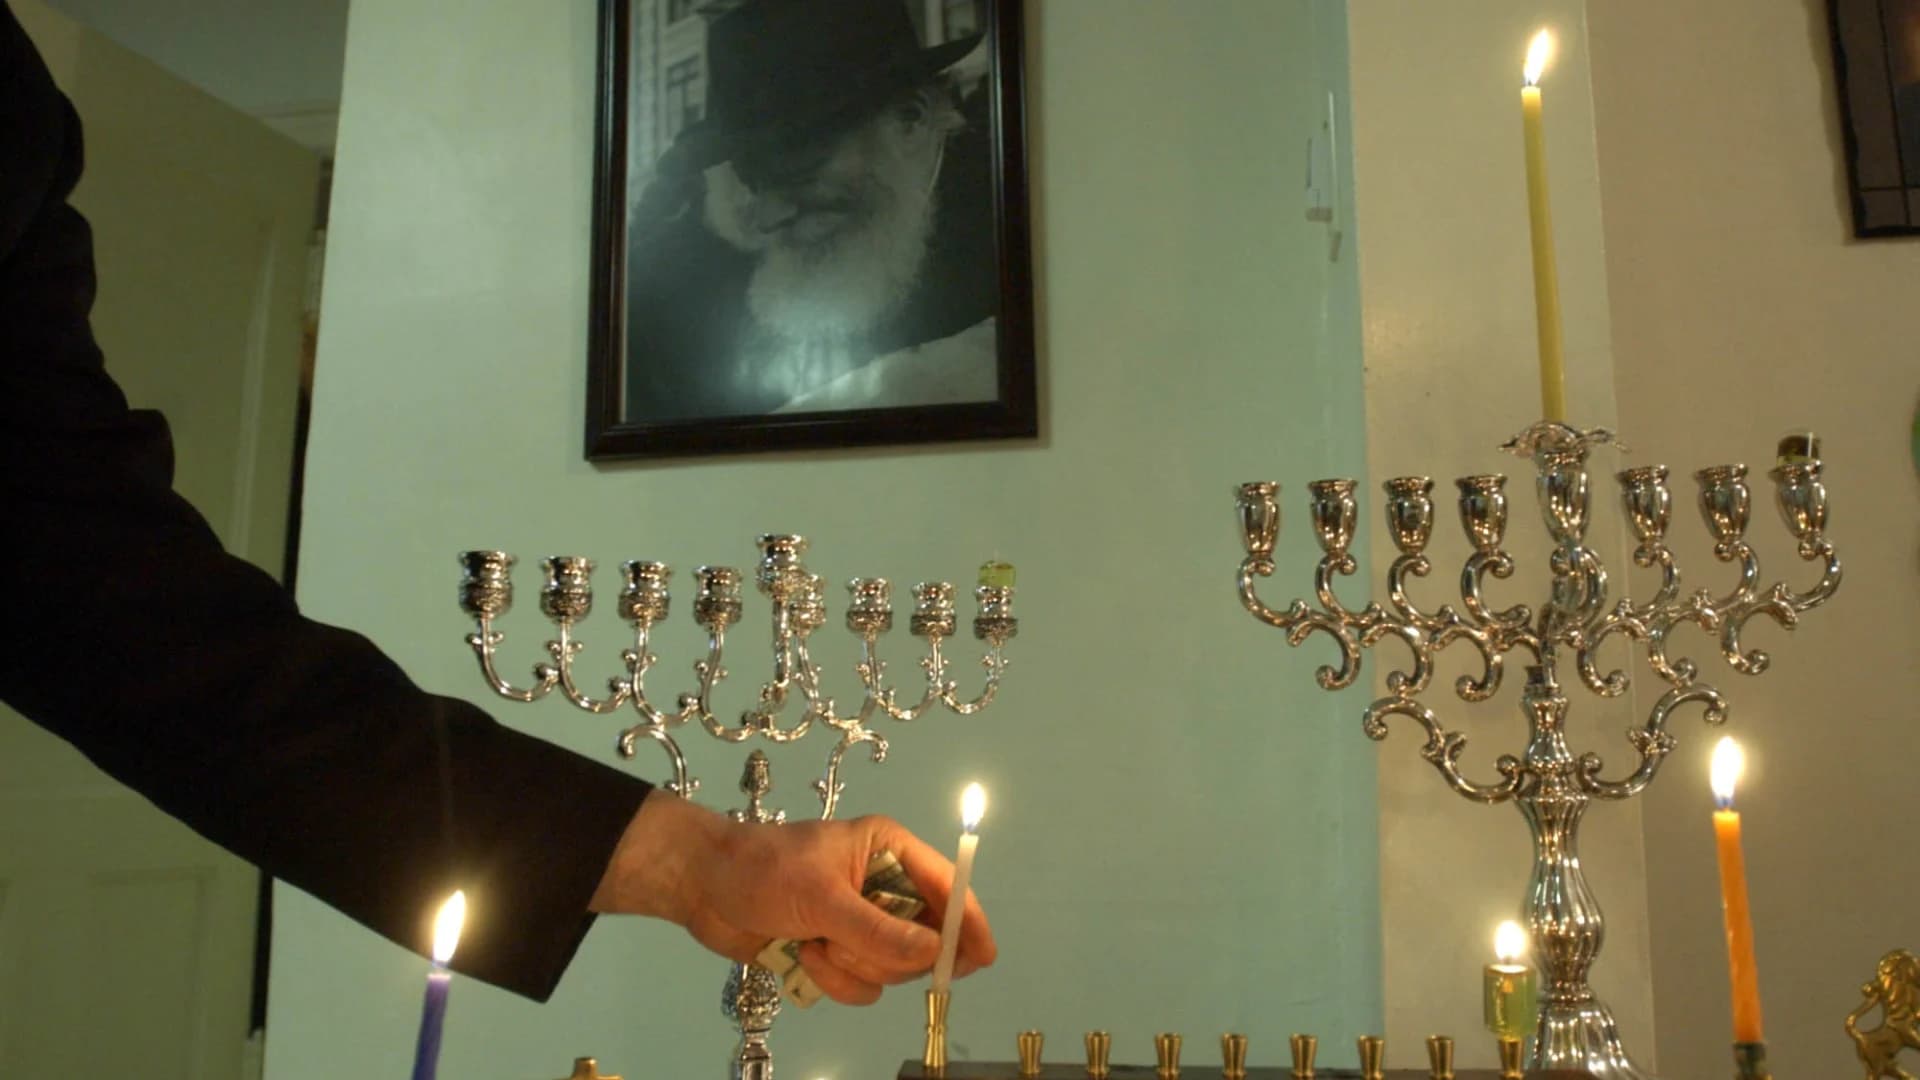 6 tips to help you celebrate Hanukkah safely this year